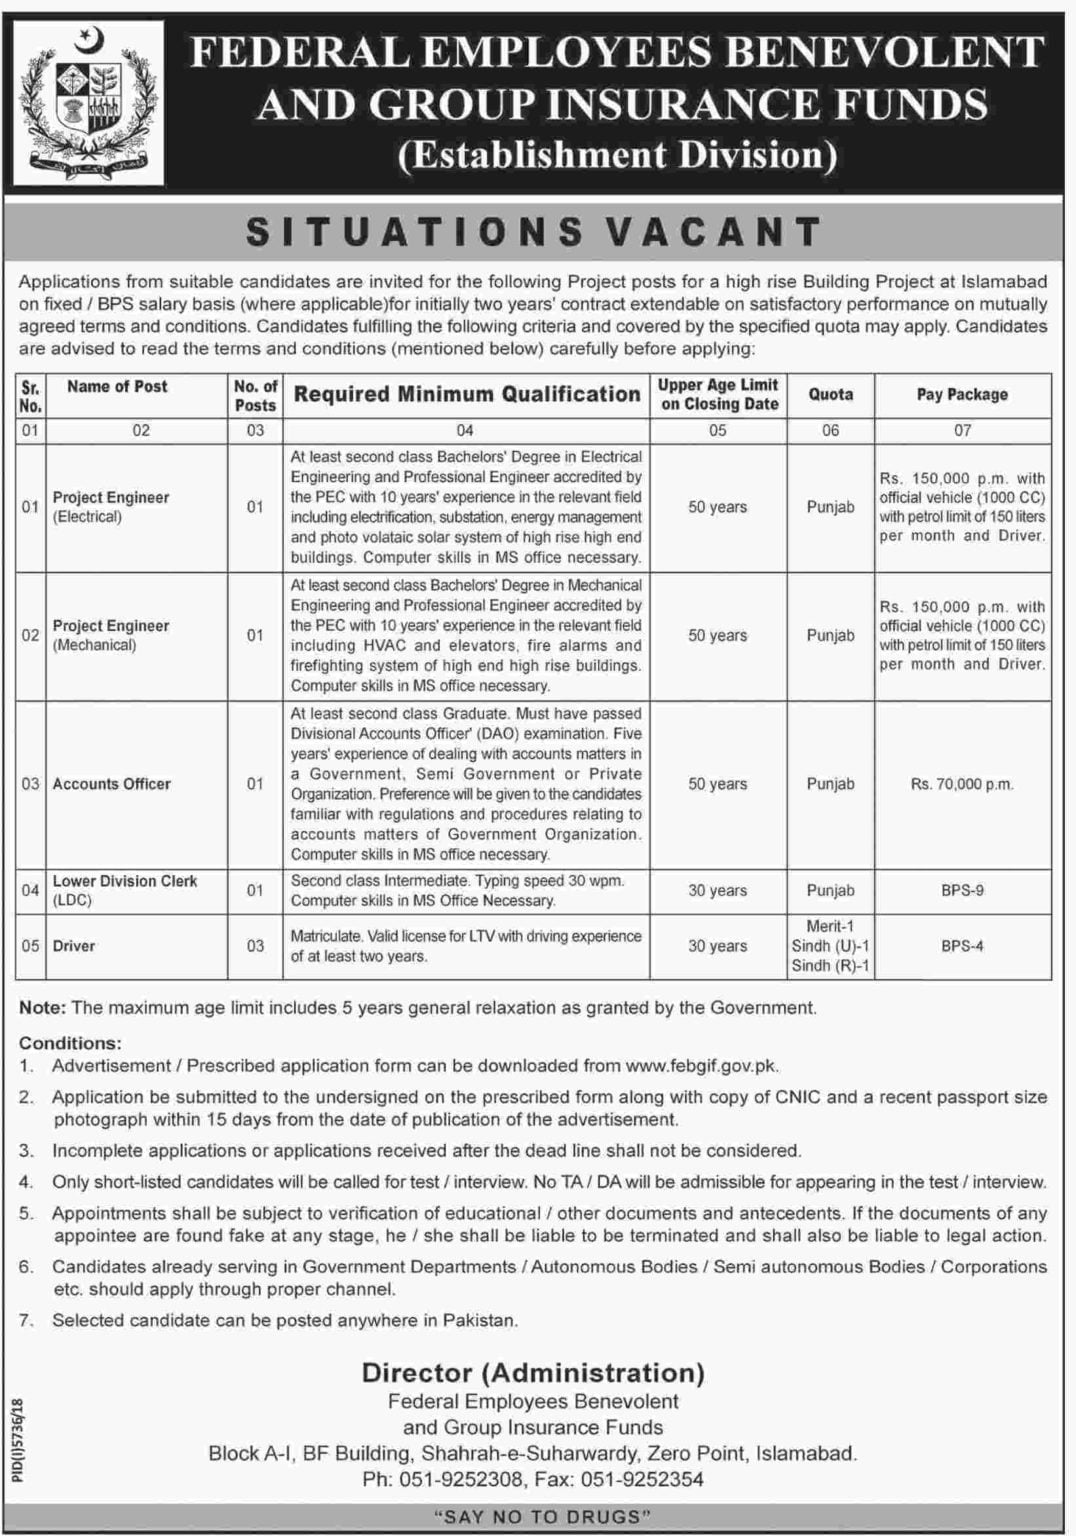 Federal Employees Benevolent and Group Insurance Funds Jobs 2019